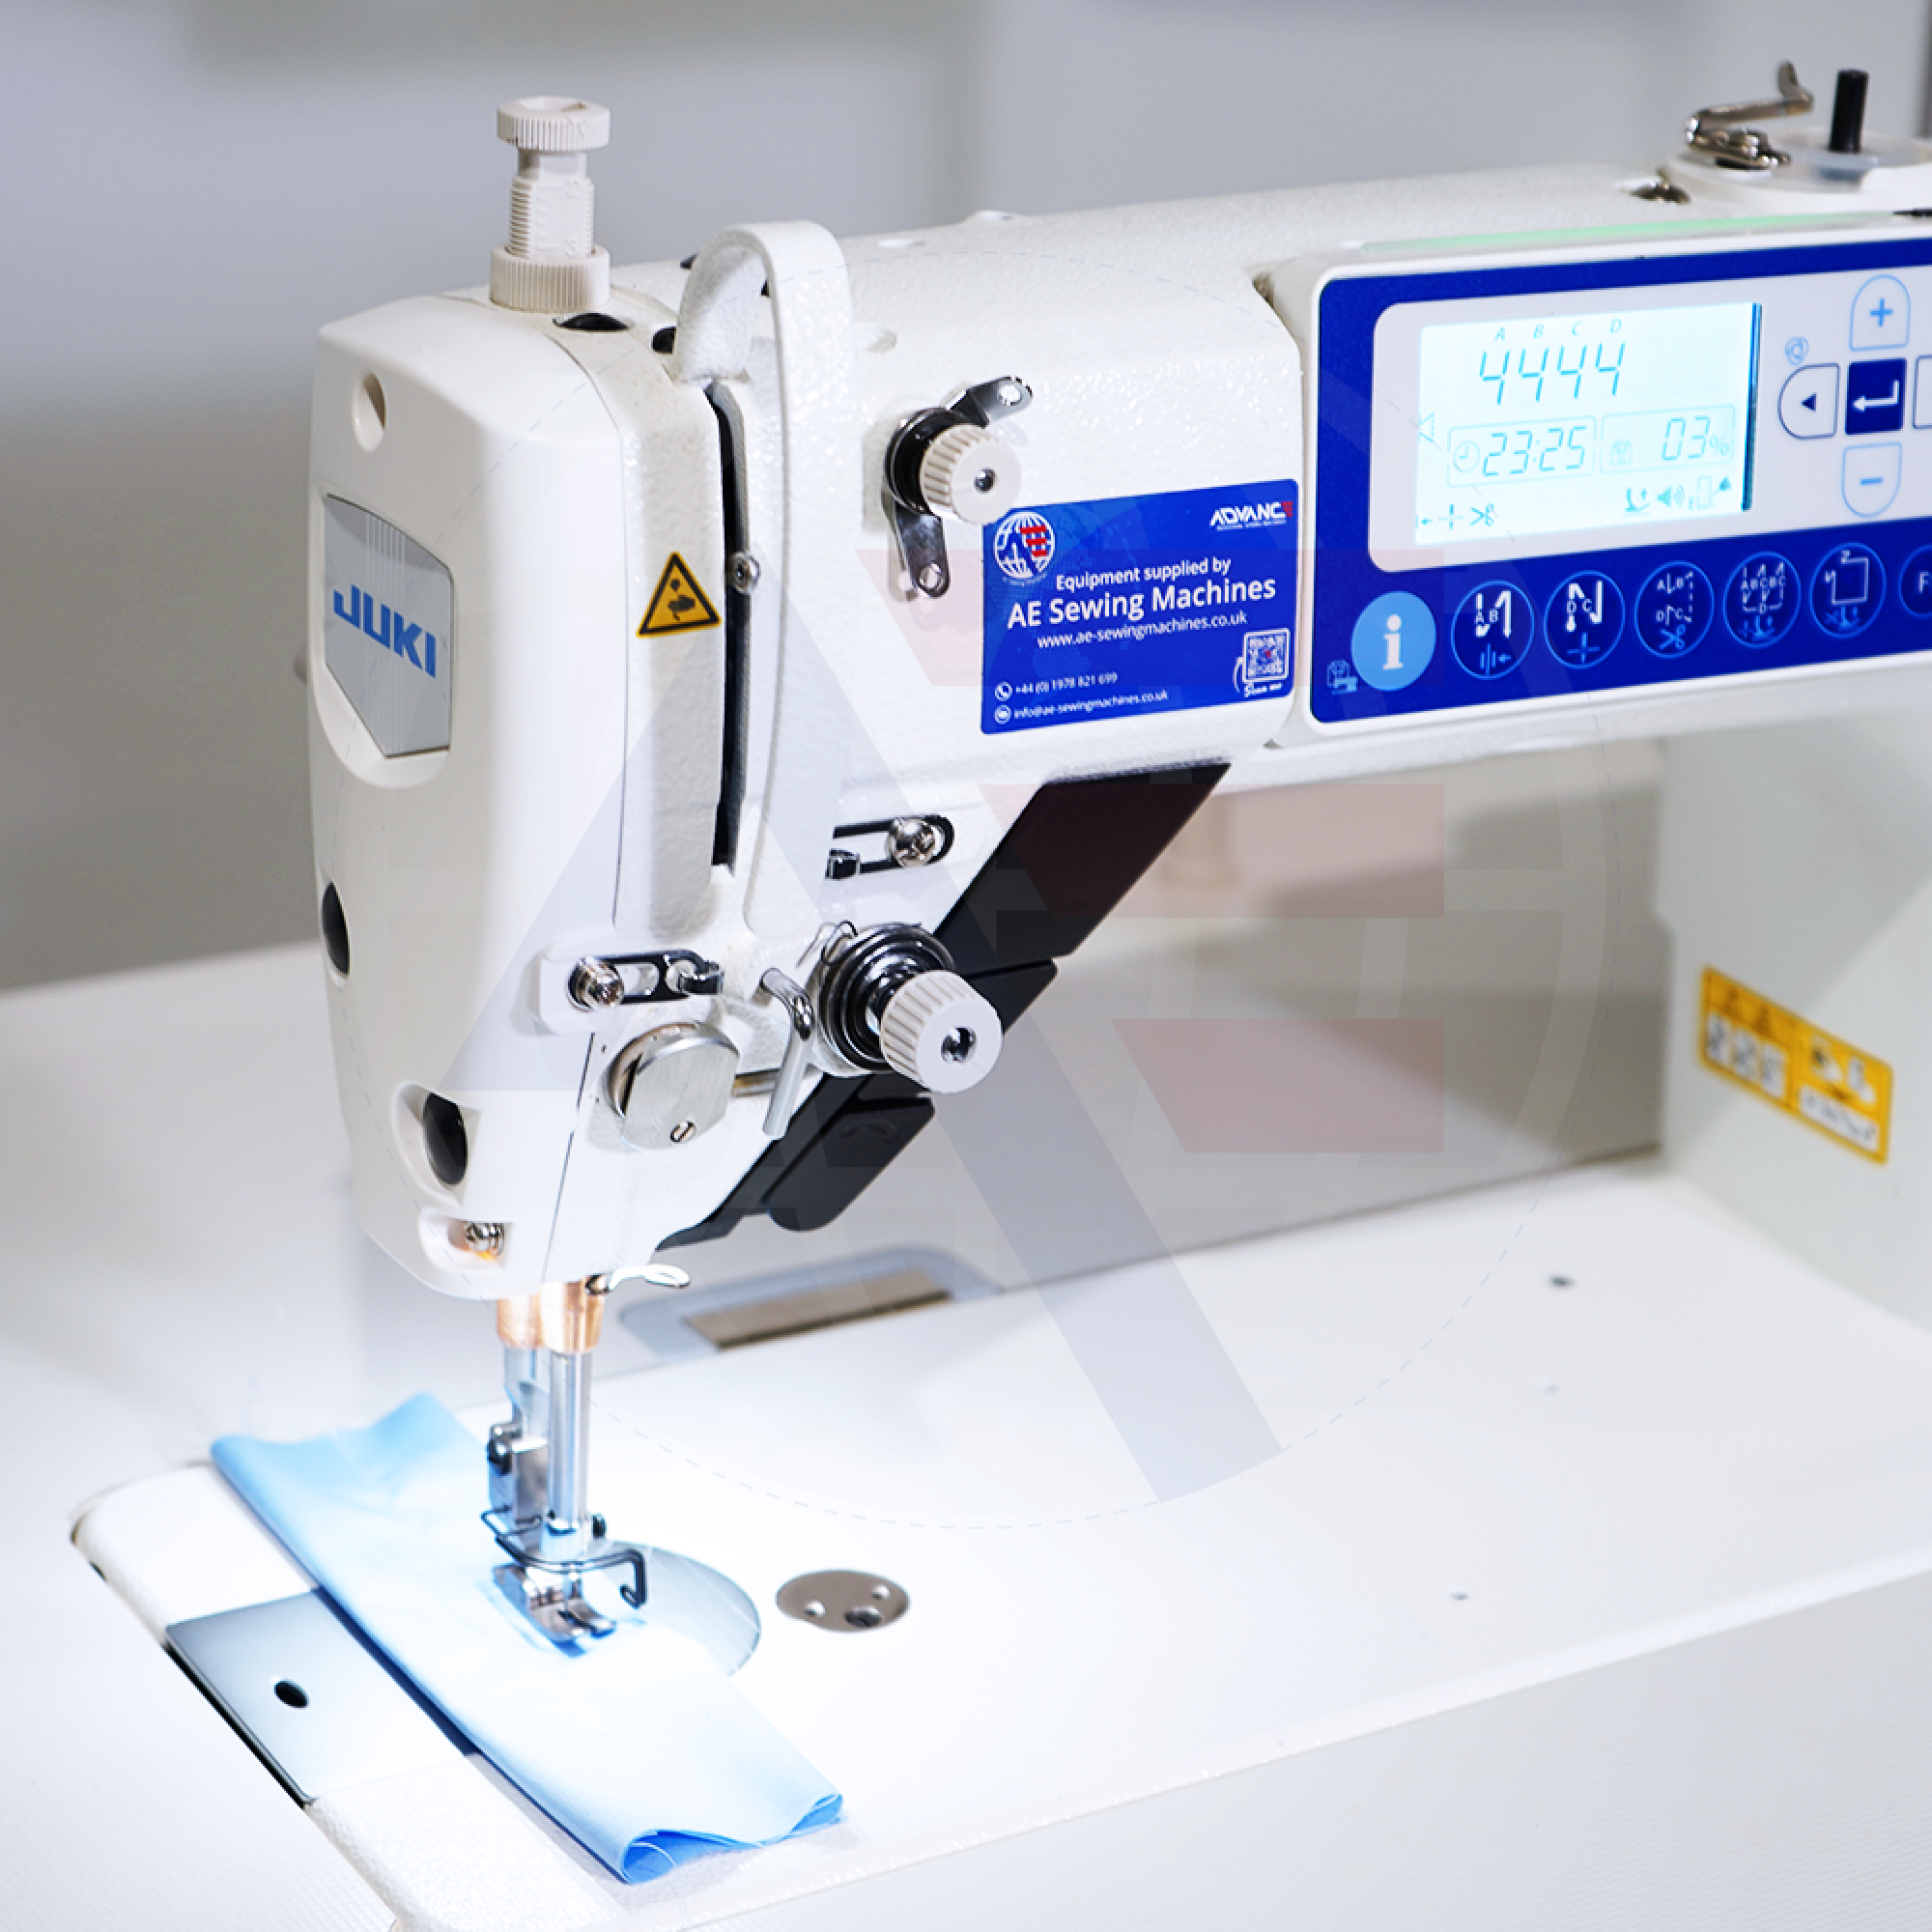 Juki Simply Smart Series Ddl-8000A 1-Needle Lockstitch Machine With Automatic Functions Sewing